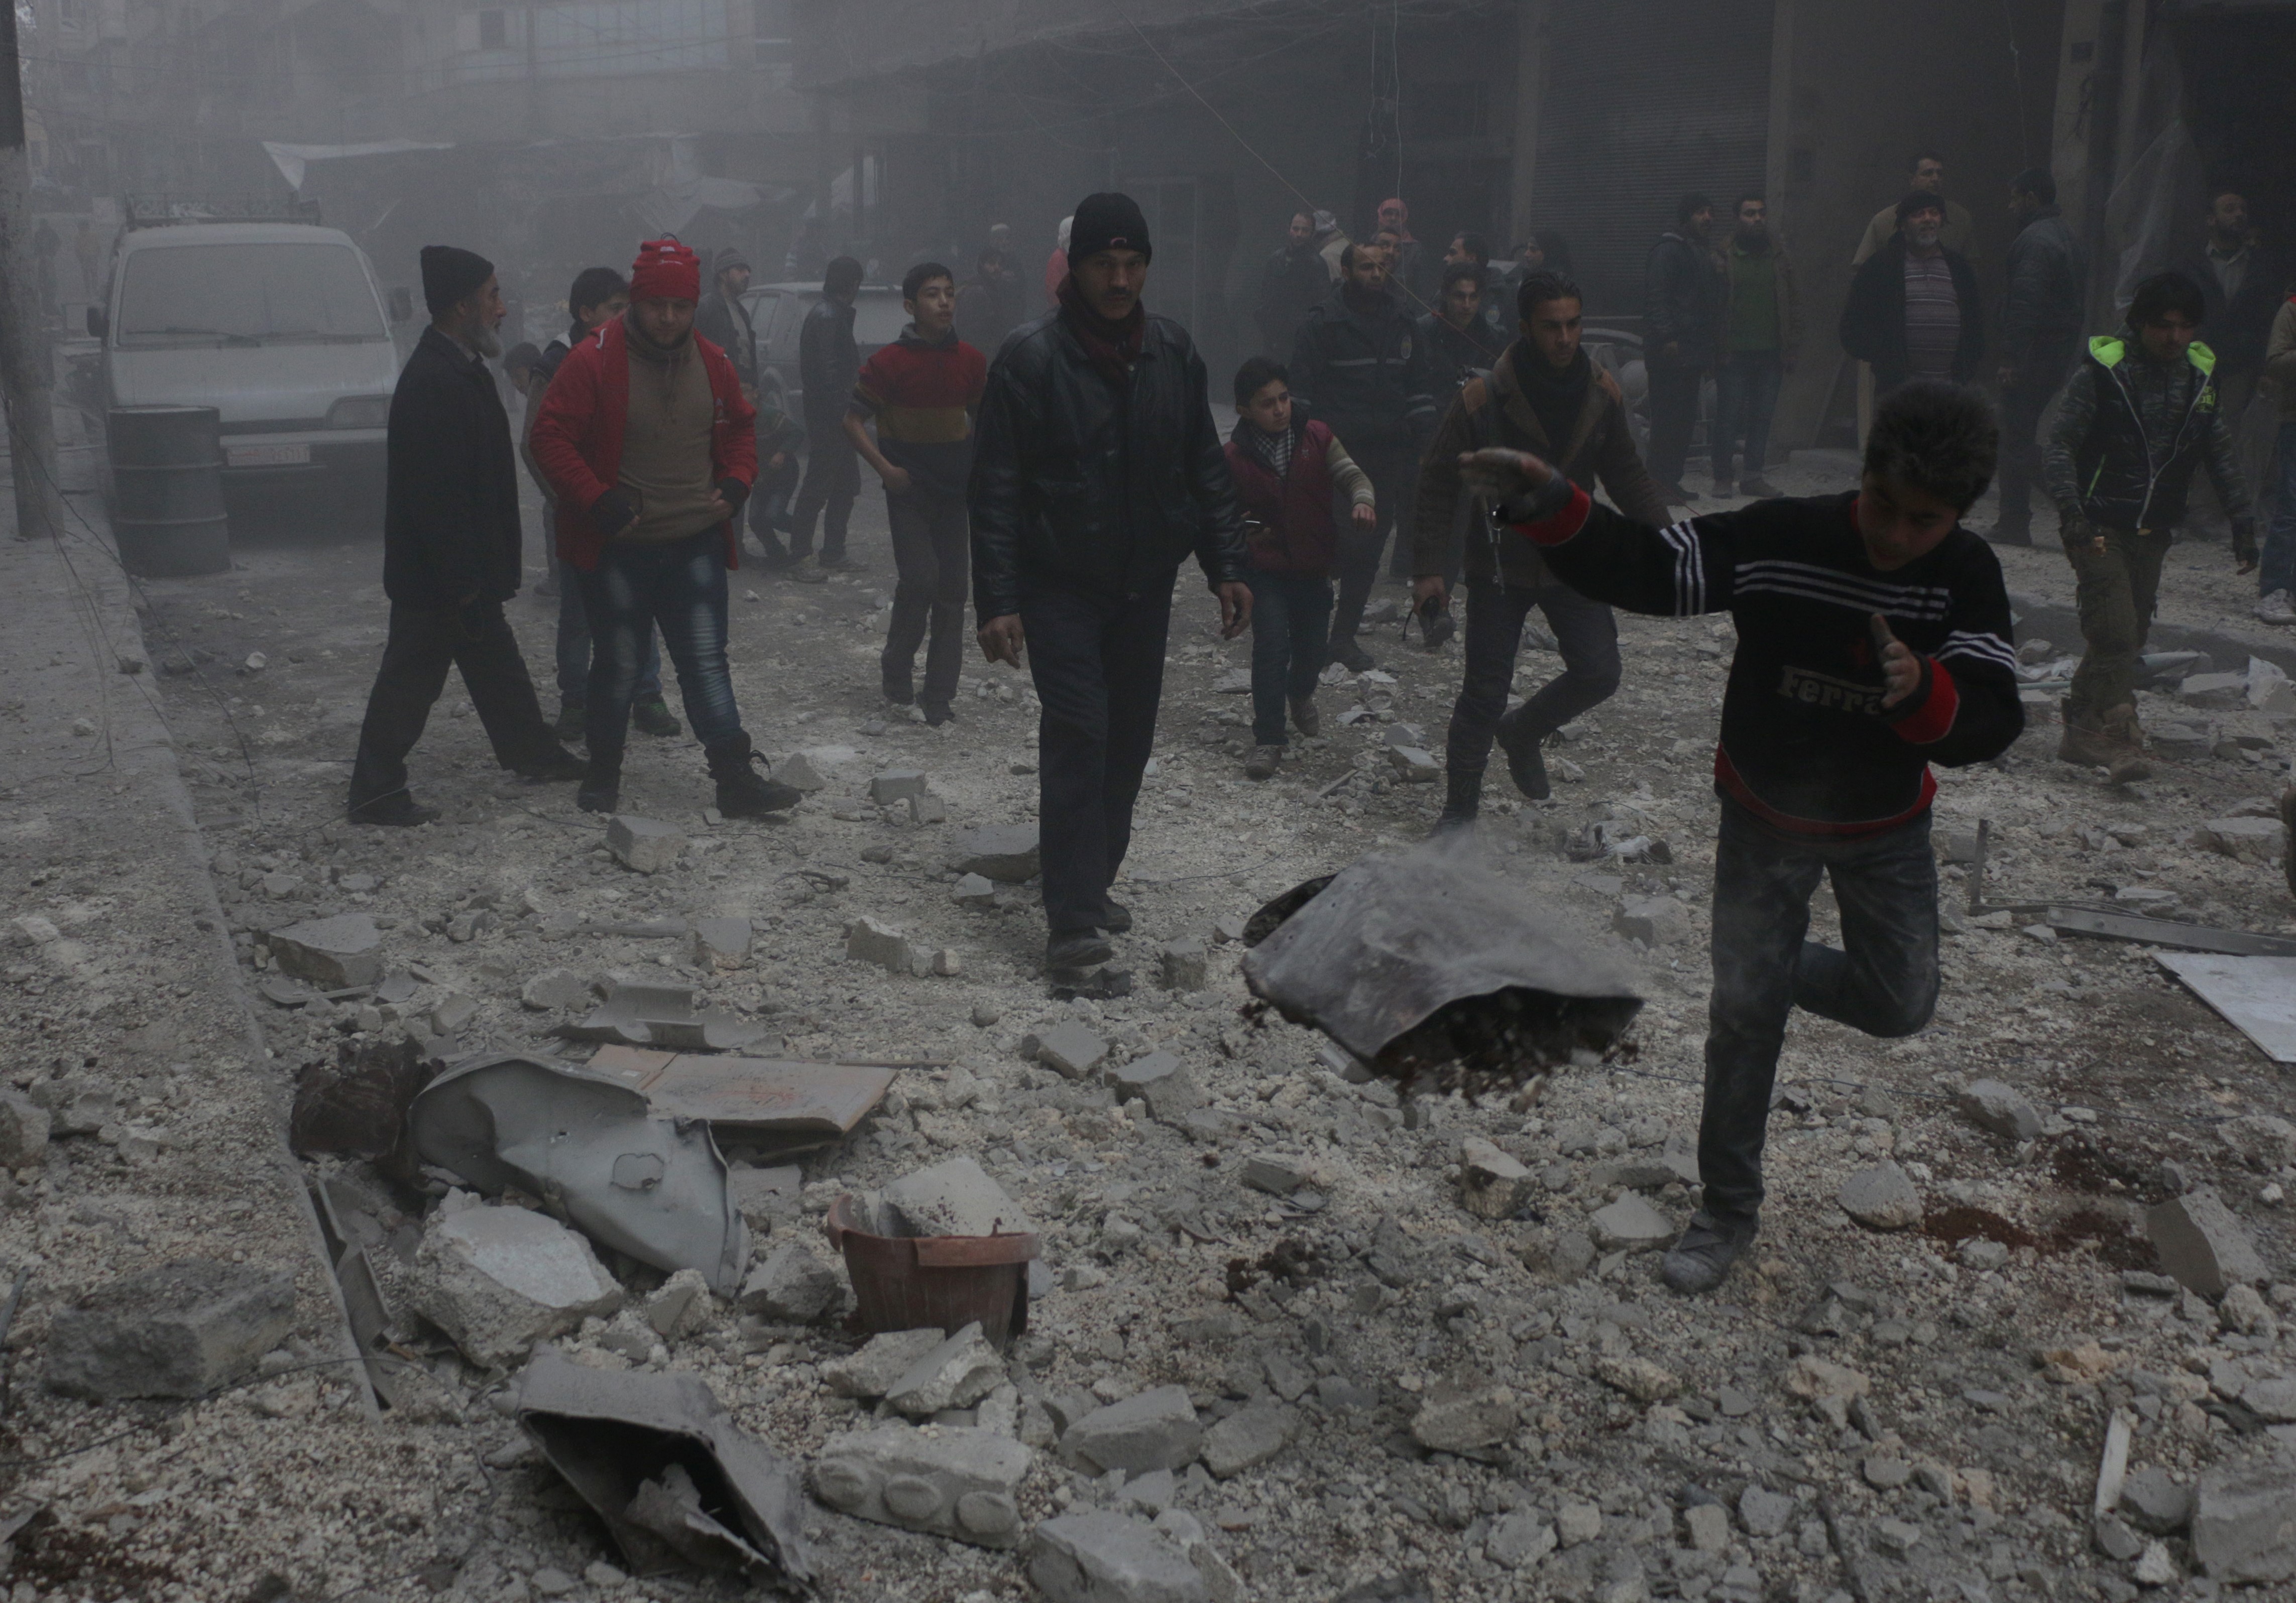 Russian air-strikes hit residential areas in Aleppo